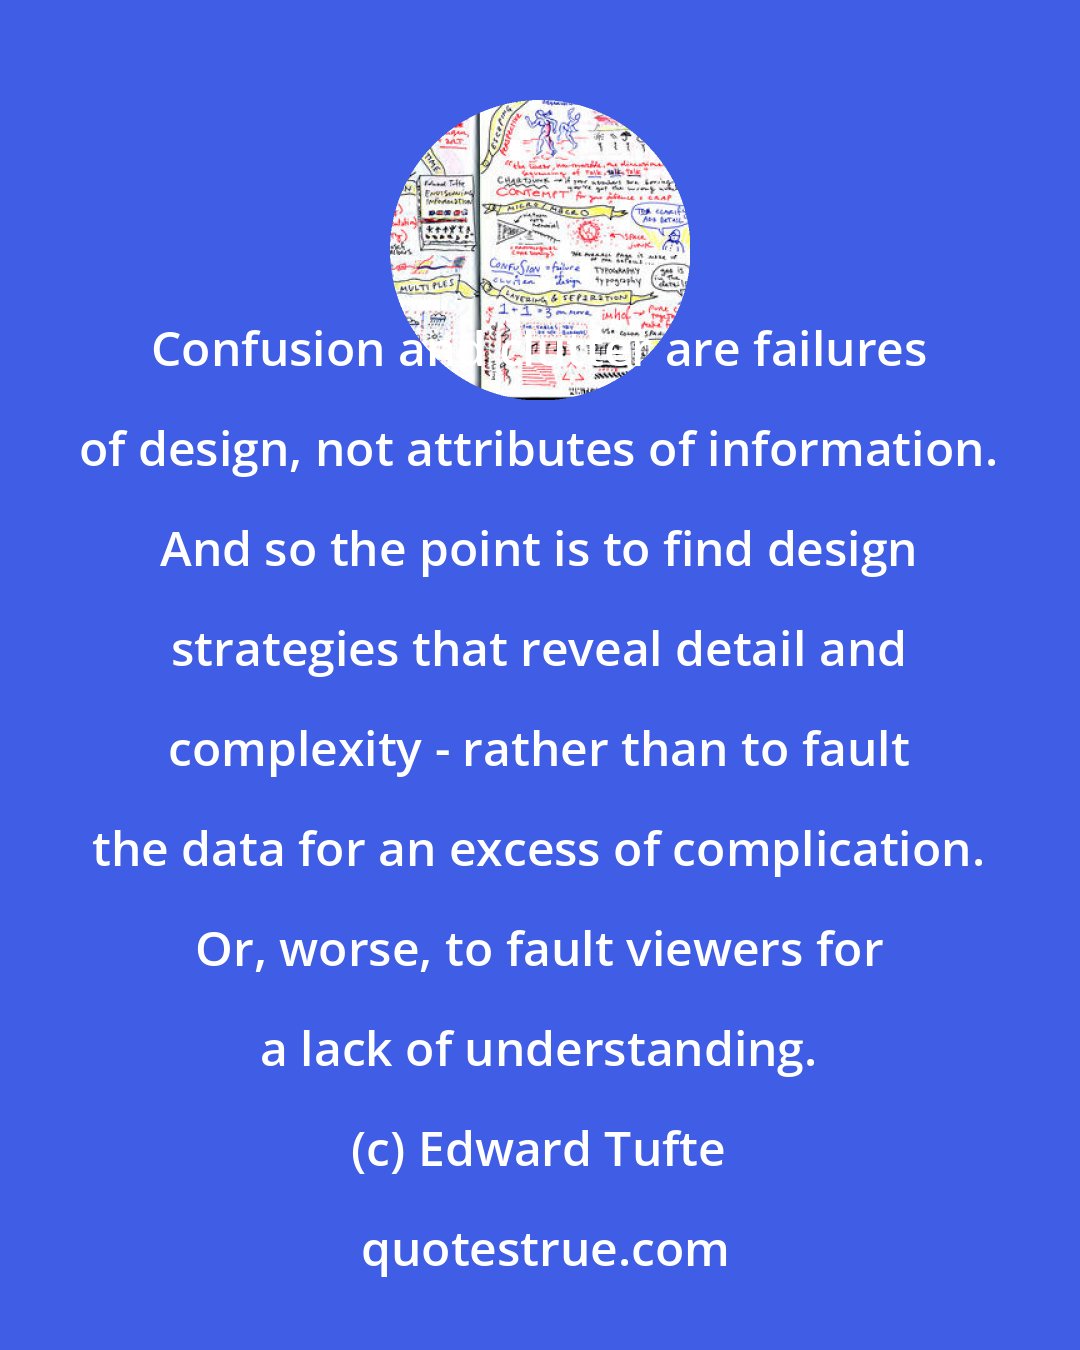 Edward Tufte: Confusion and clutter are failures of design, not attributes of information. And so the point is to find design strategies that reveal detail and complexity - rather than to fault the data for an excess of complication. Or, worse, to fault viewers for a lack of understanding.